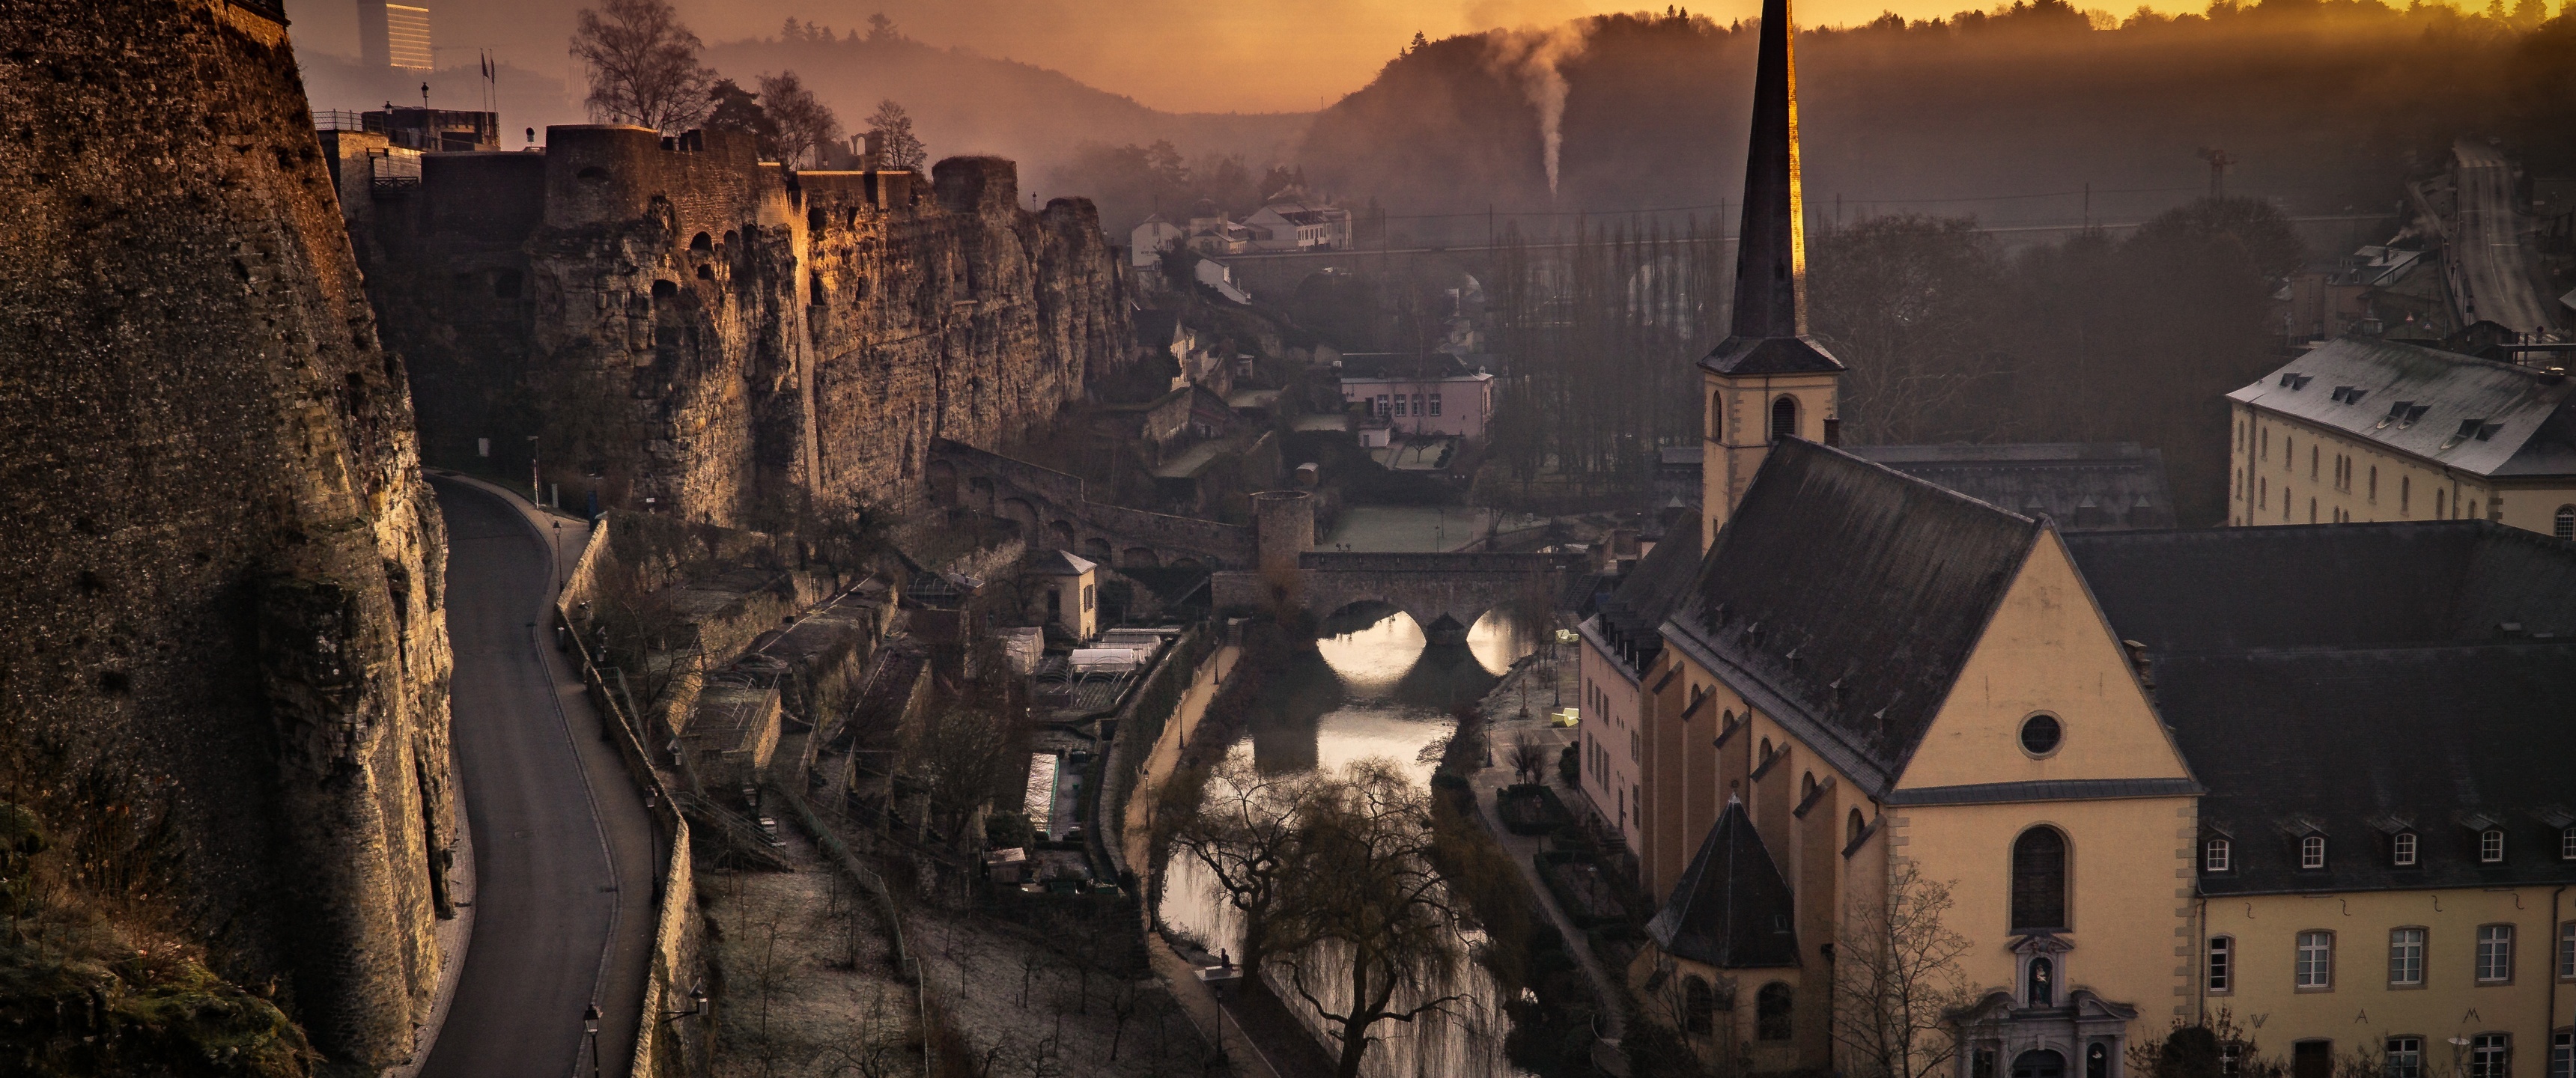 Luxembourg, Travels, Luxembourg City wallpaper, Sunset cityscape, 3440x1440 Dual Screen Desktop